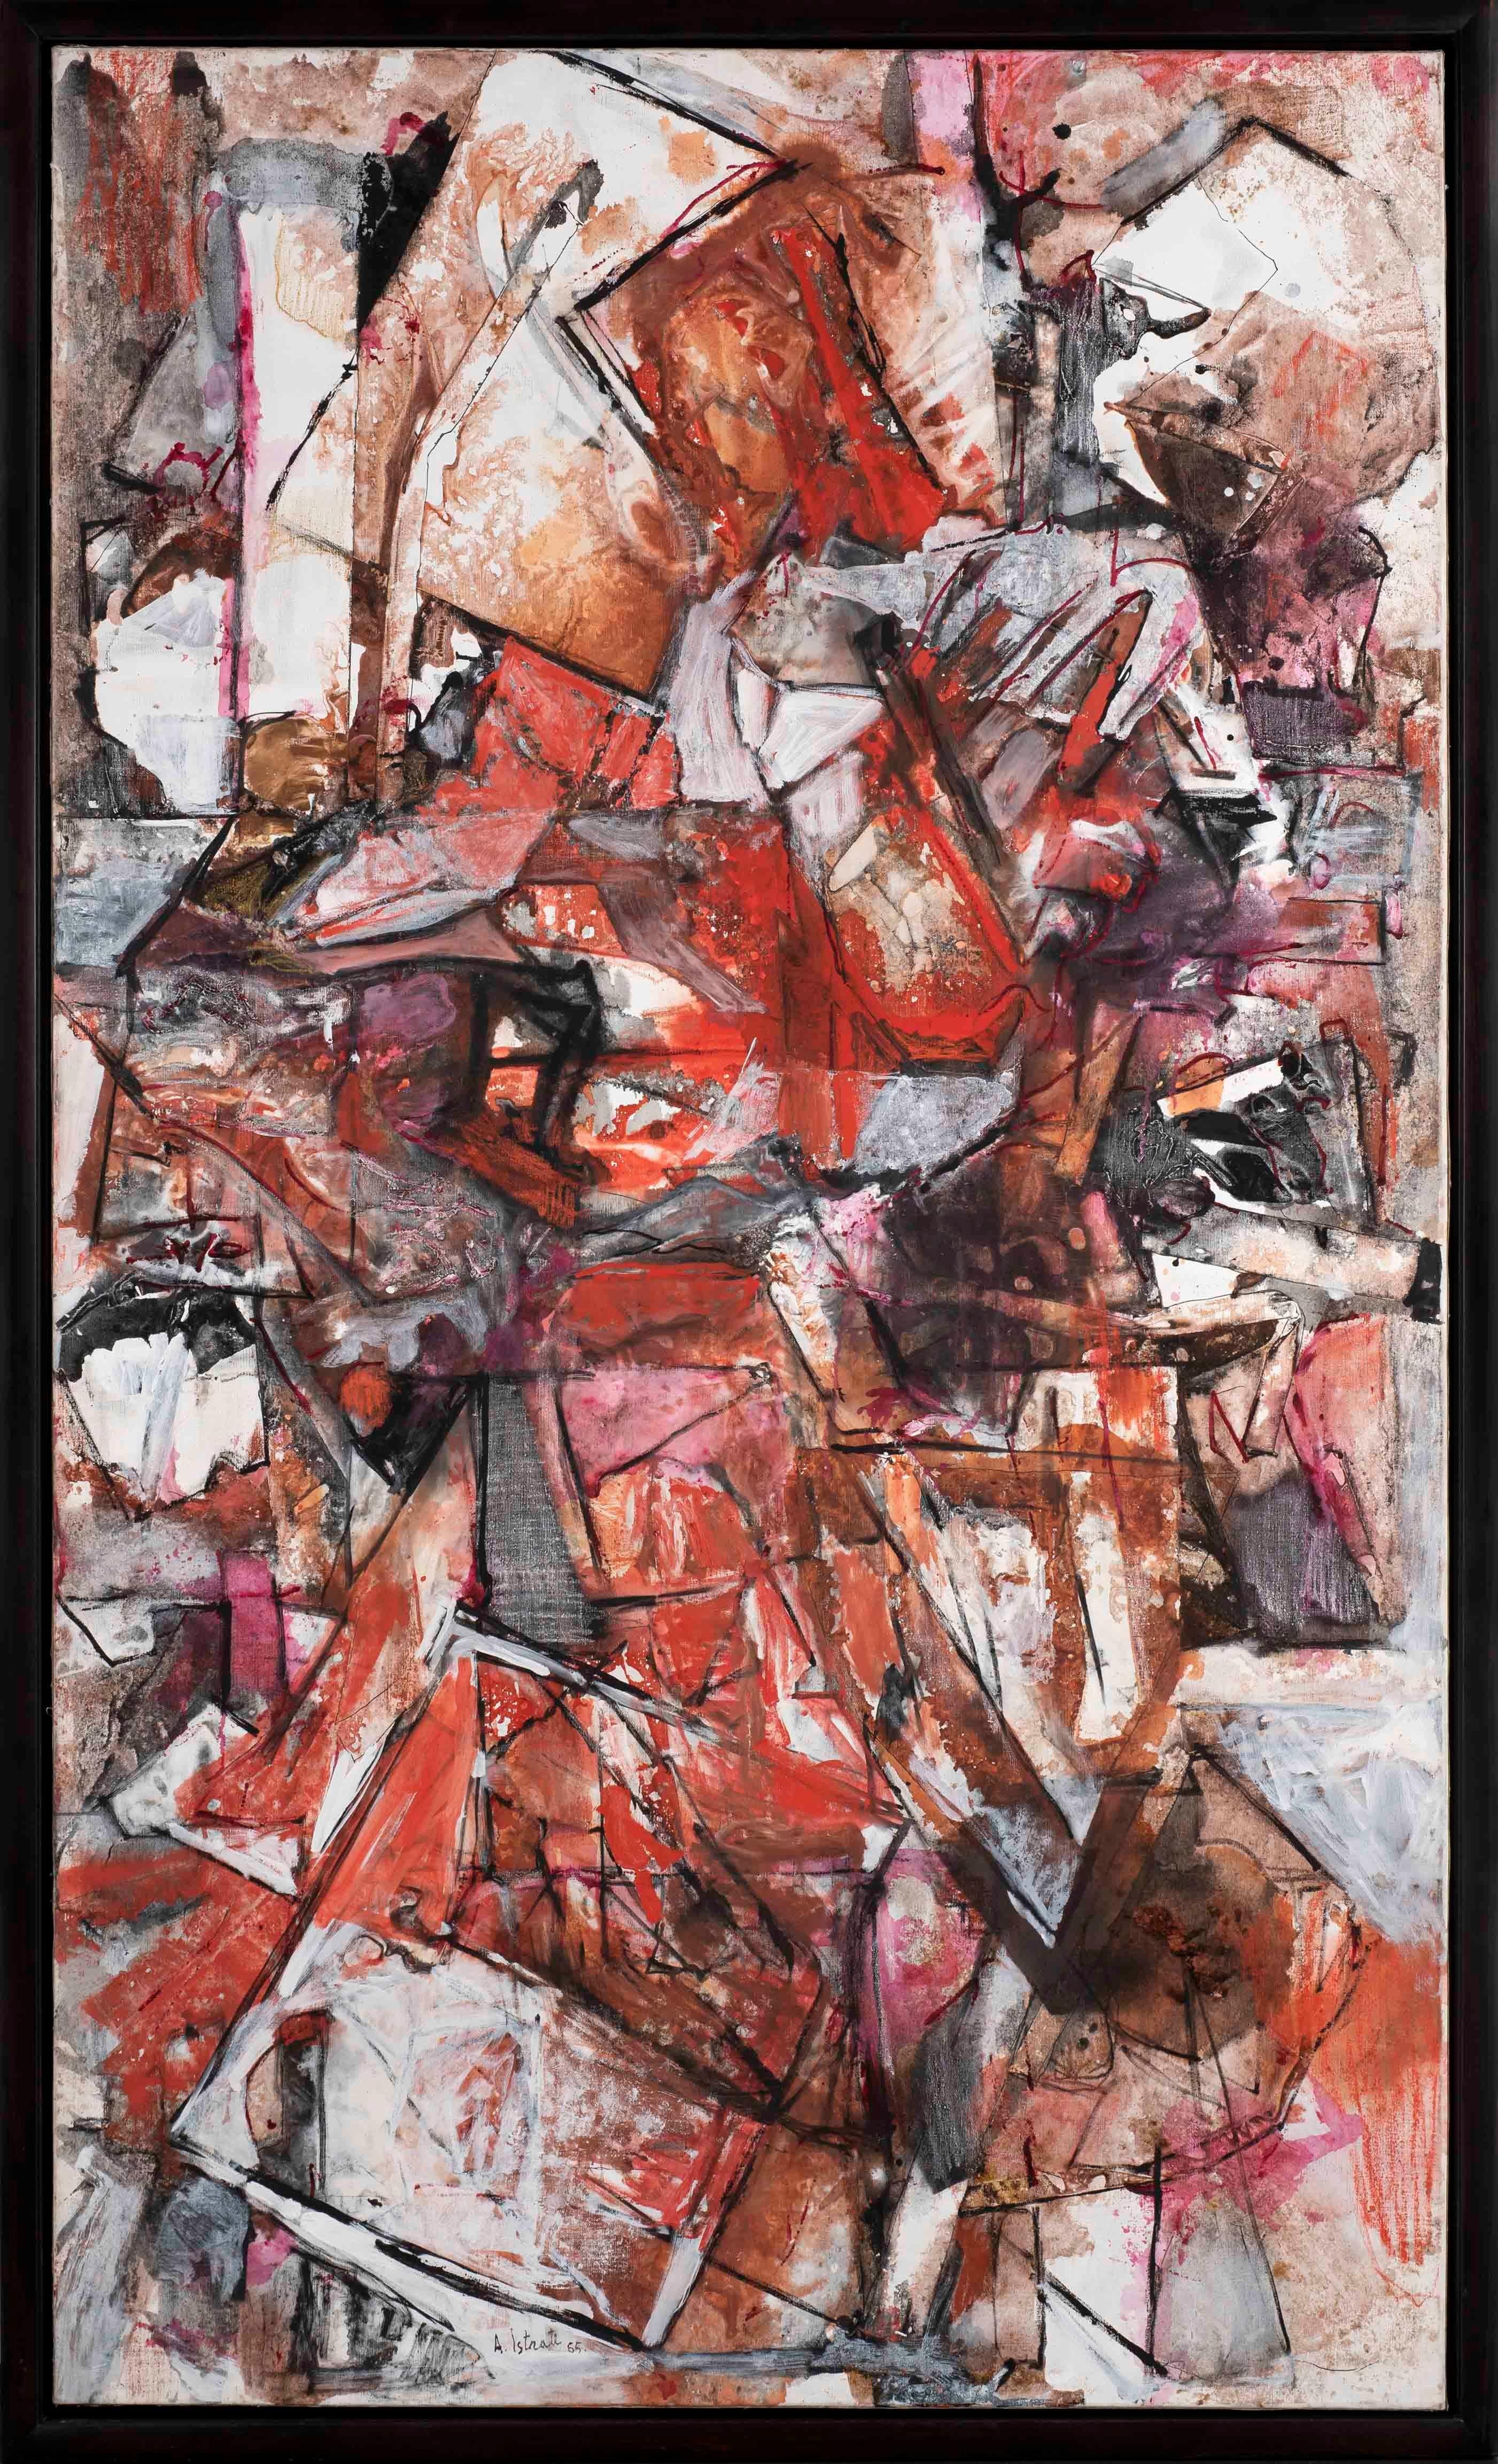 Sans titre, 1965 - Painting by Alexandre Istrati